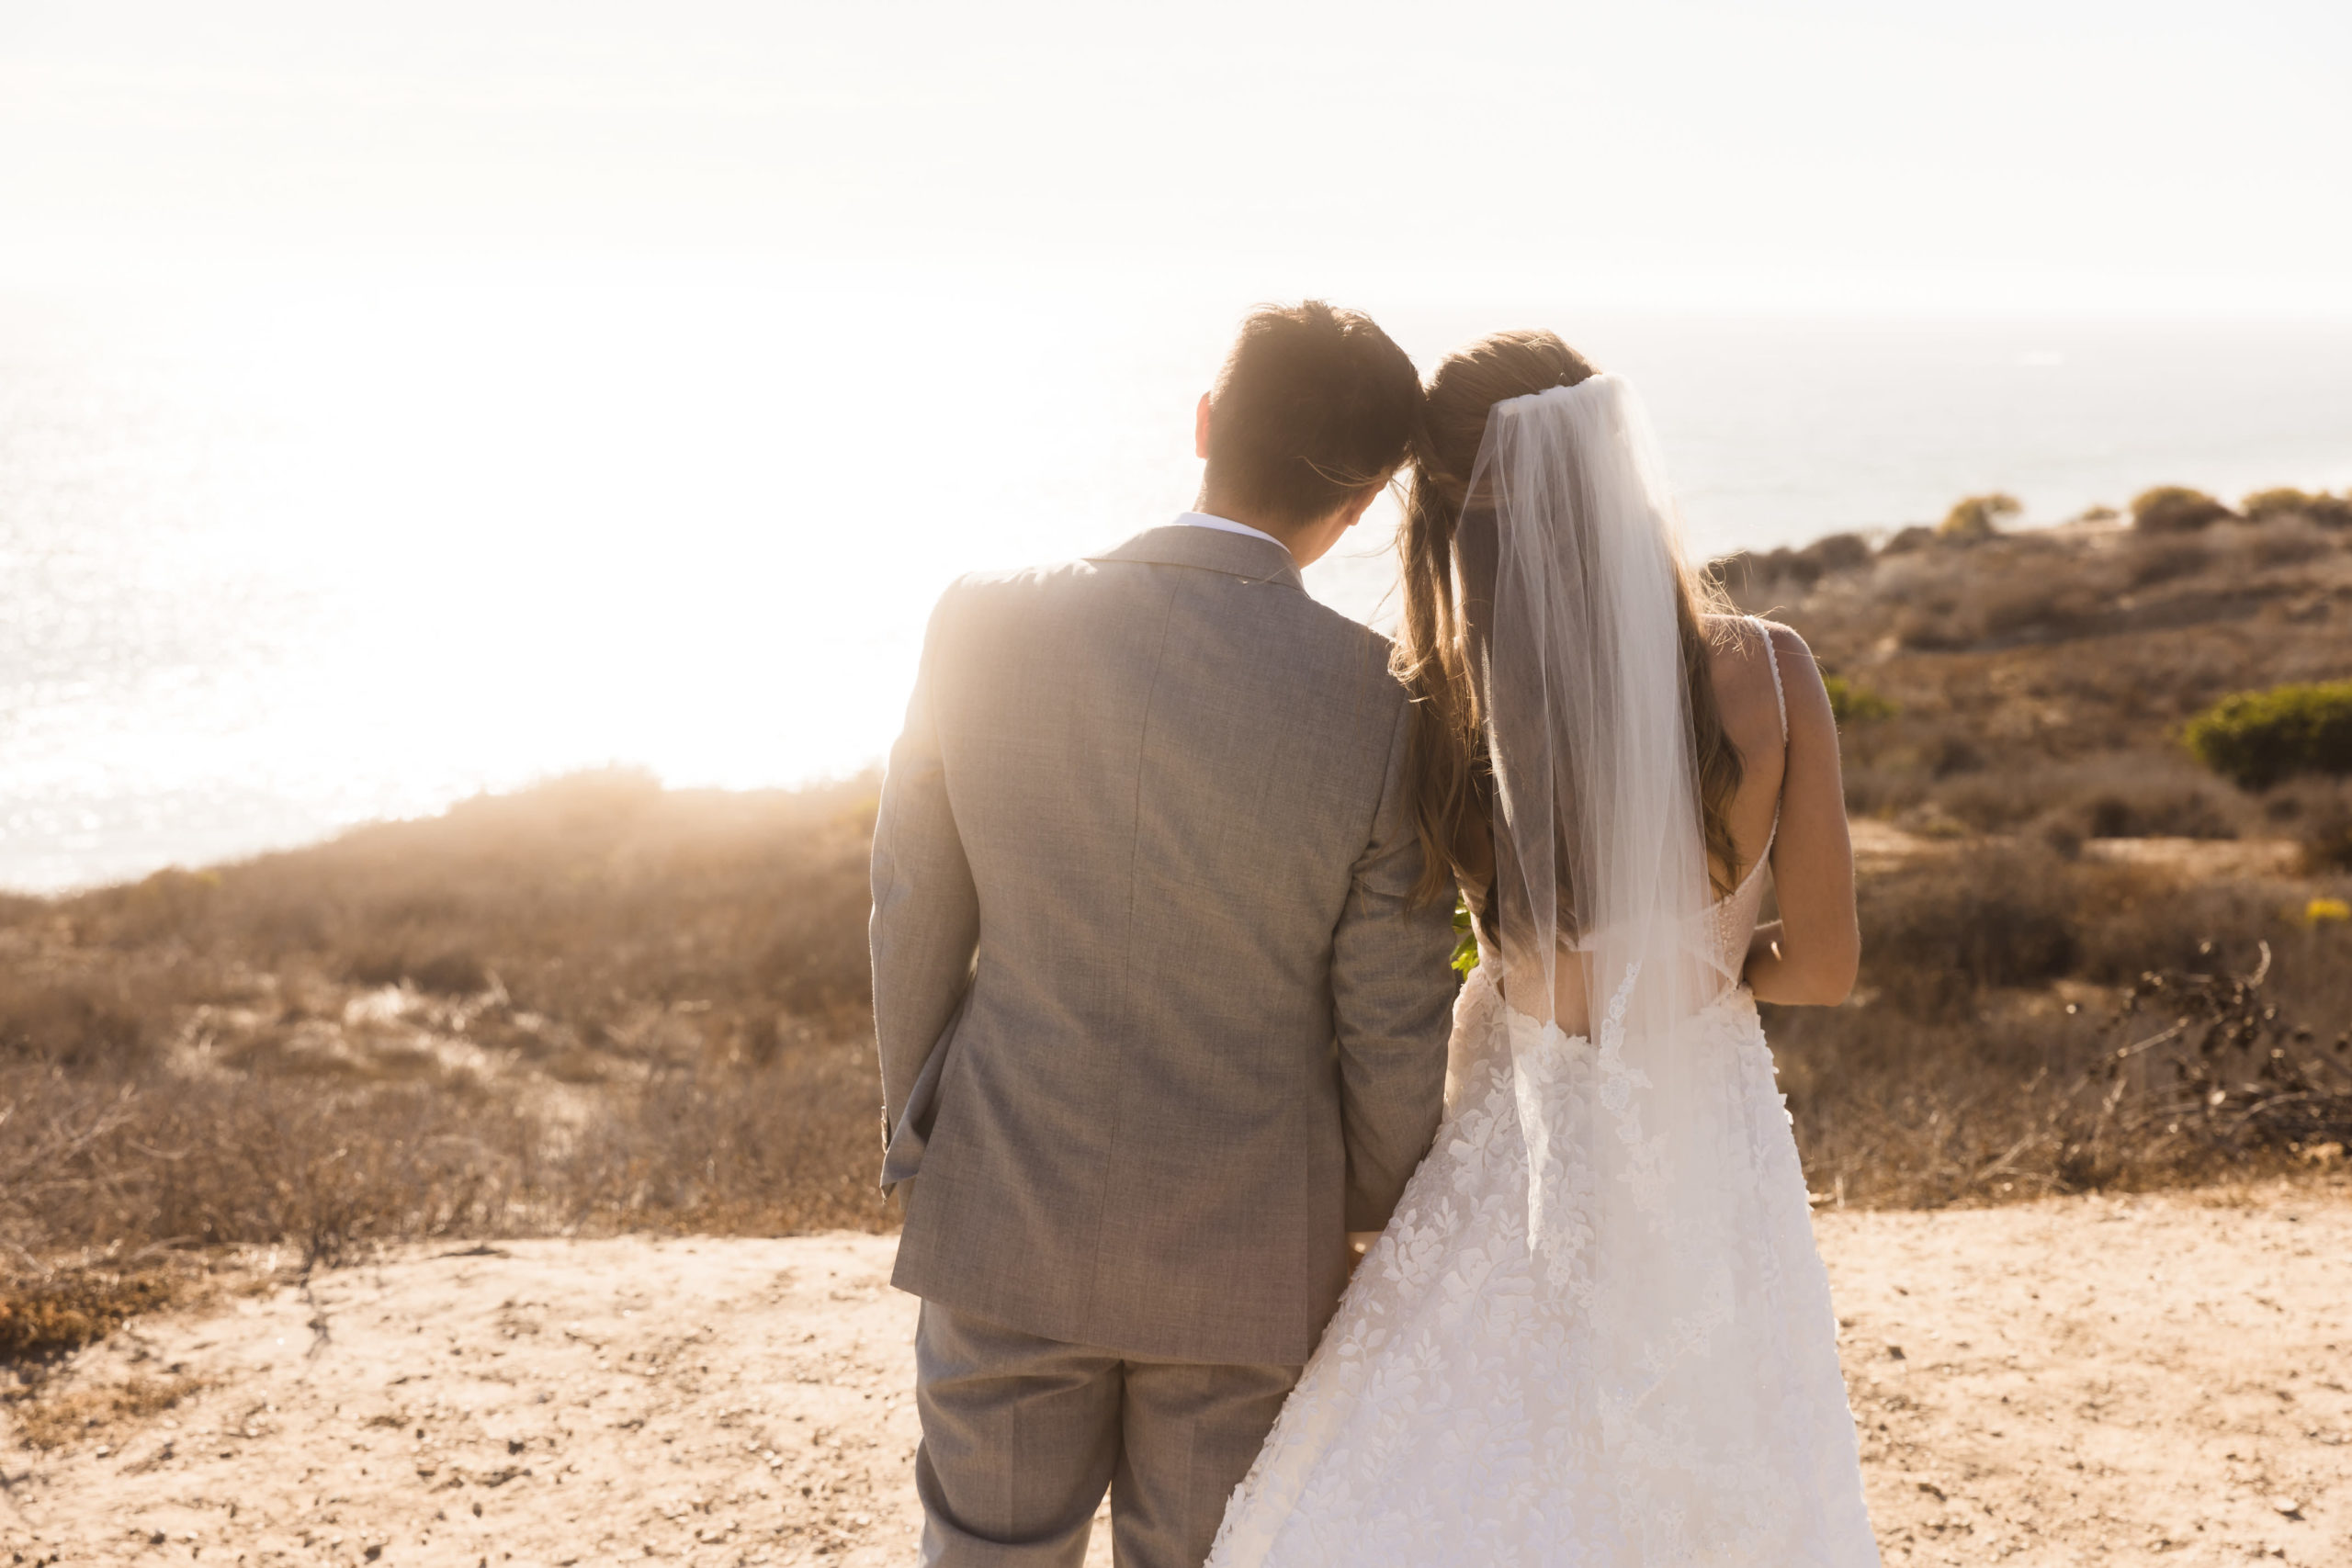 Bride and groom posing in front of beach view during golden hour, taken by Joshua Tree wedding photographer Christopher Brown